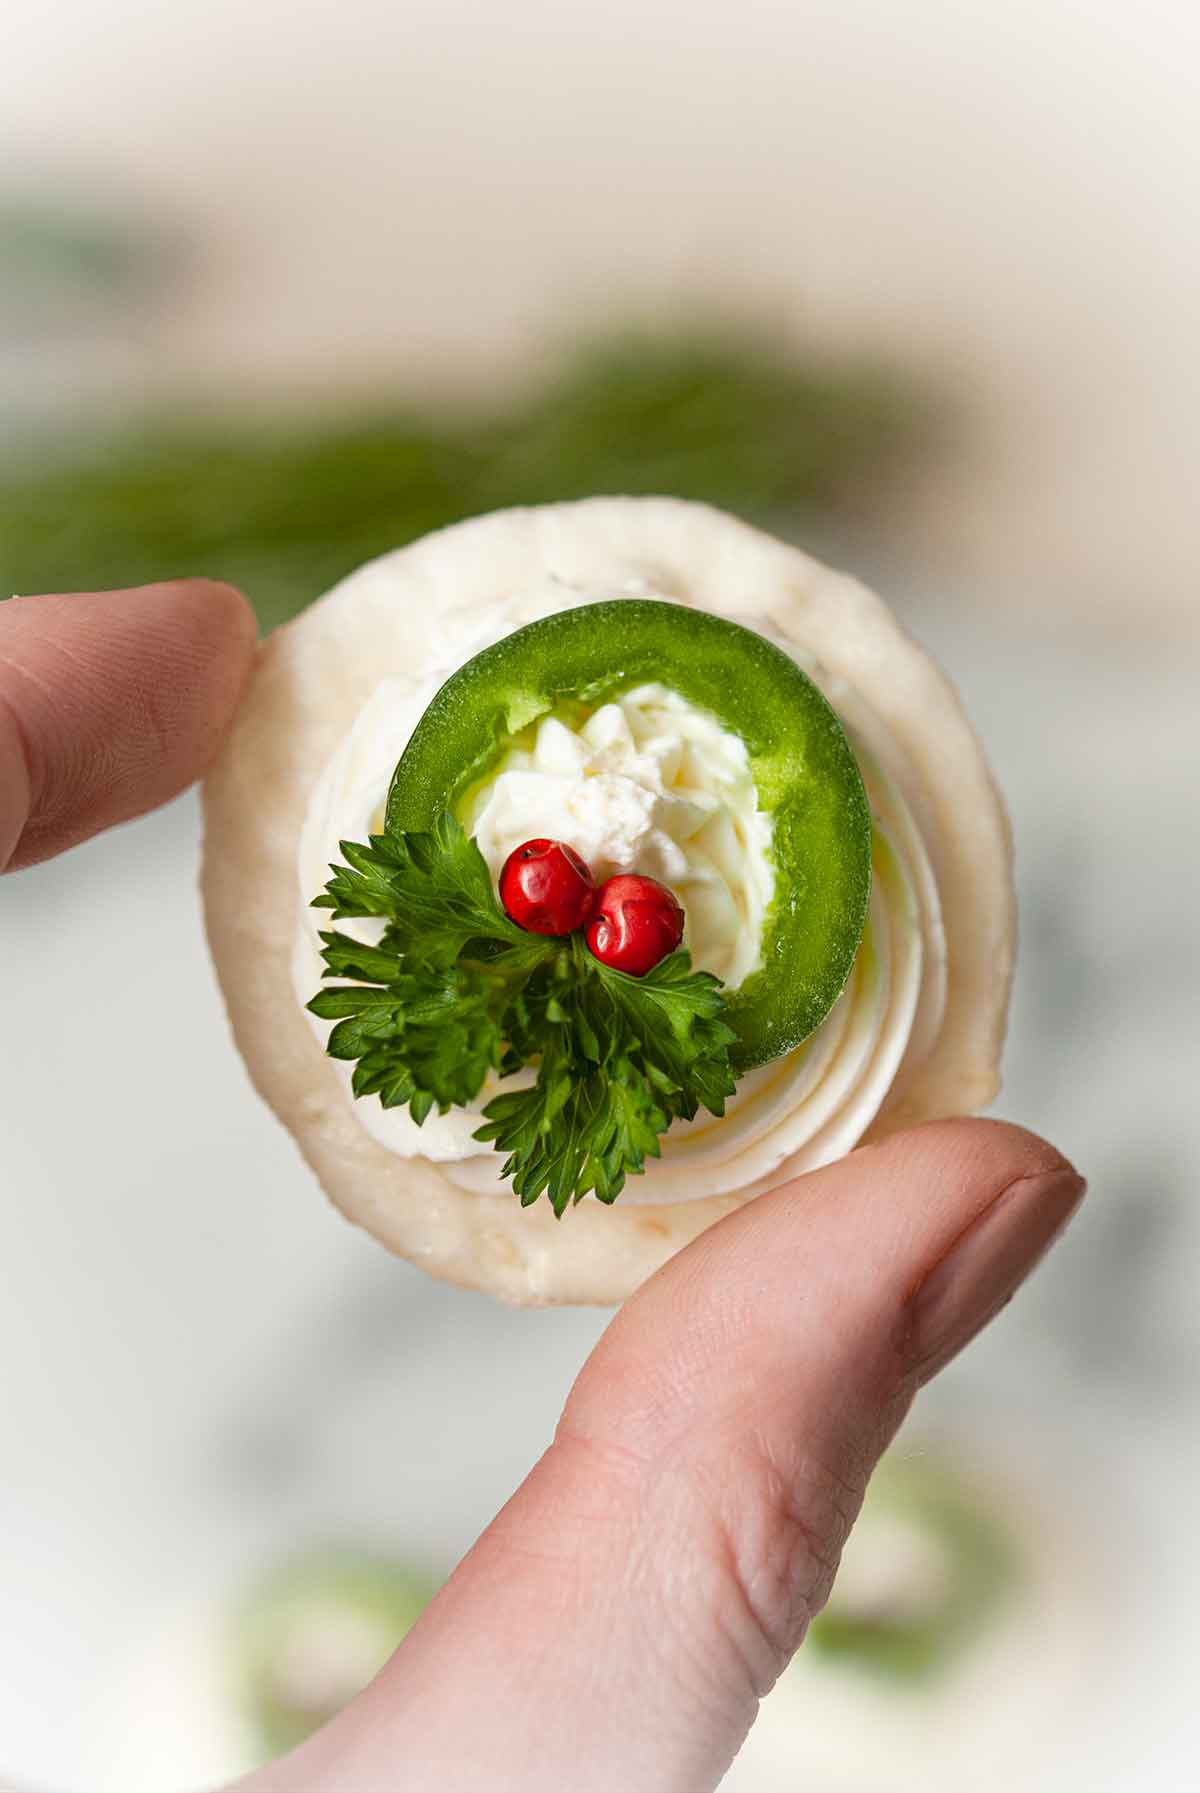 fingers holding a wreath appetizer.